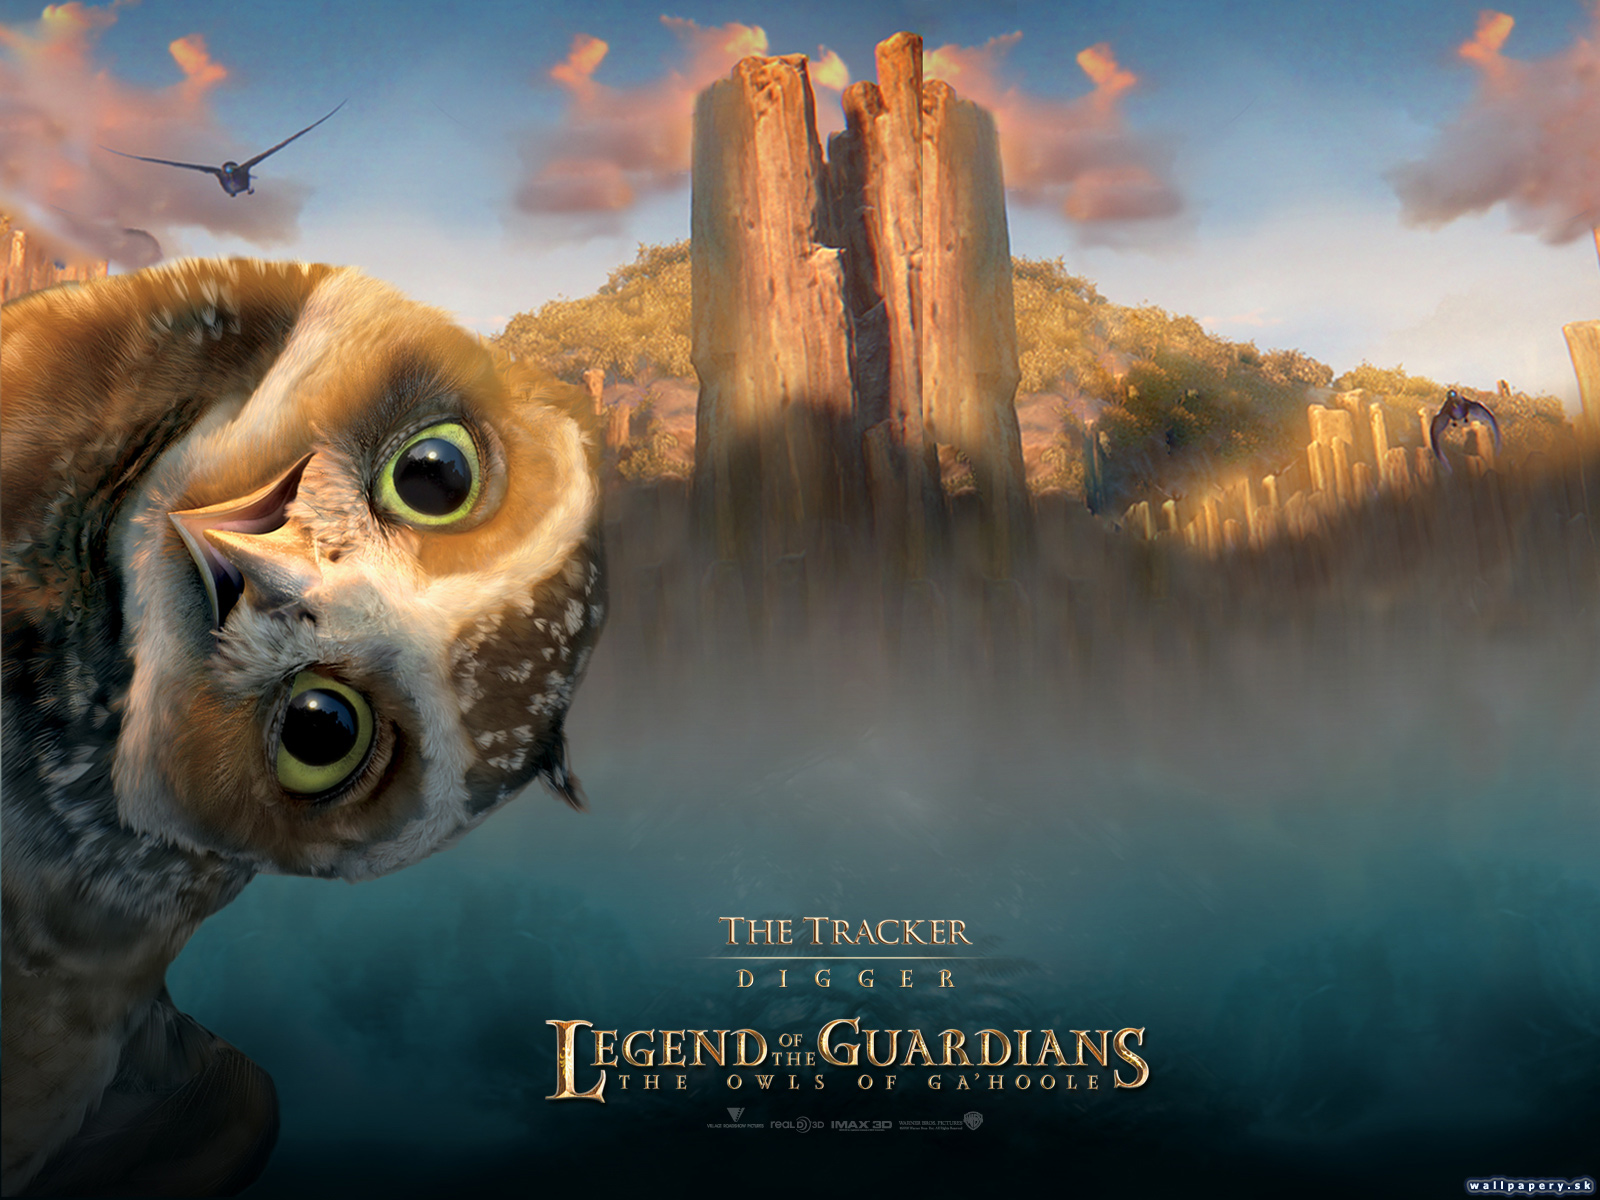 Legend of the Guardians: The Owls of Ga'Hoole - wallpaper 1